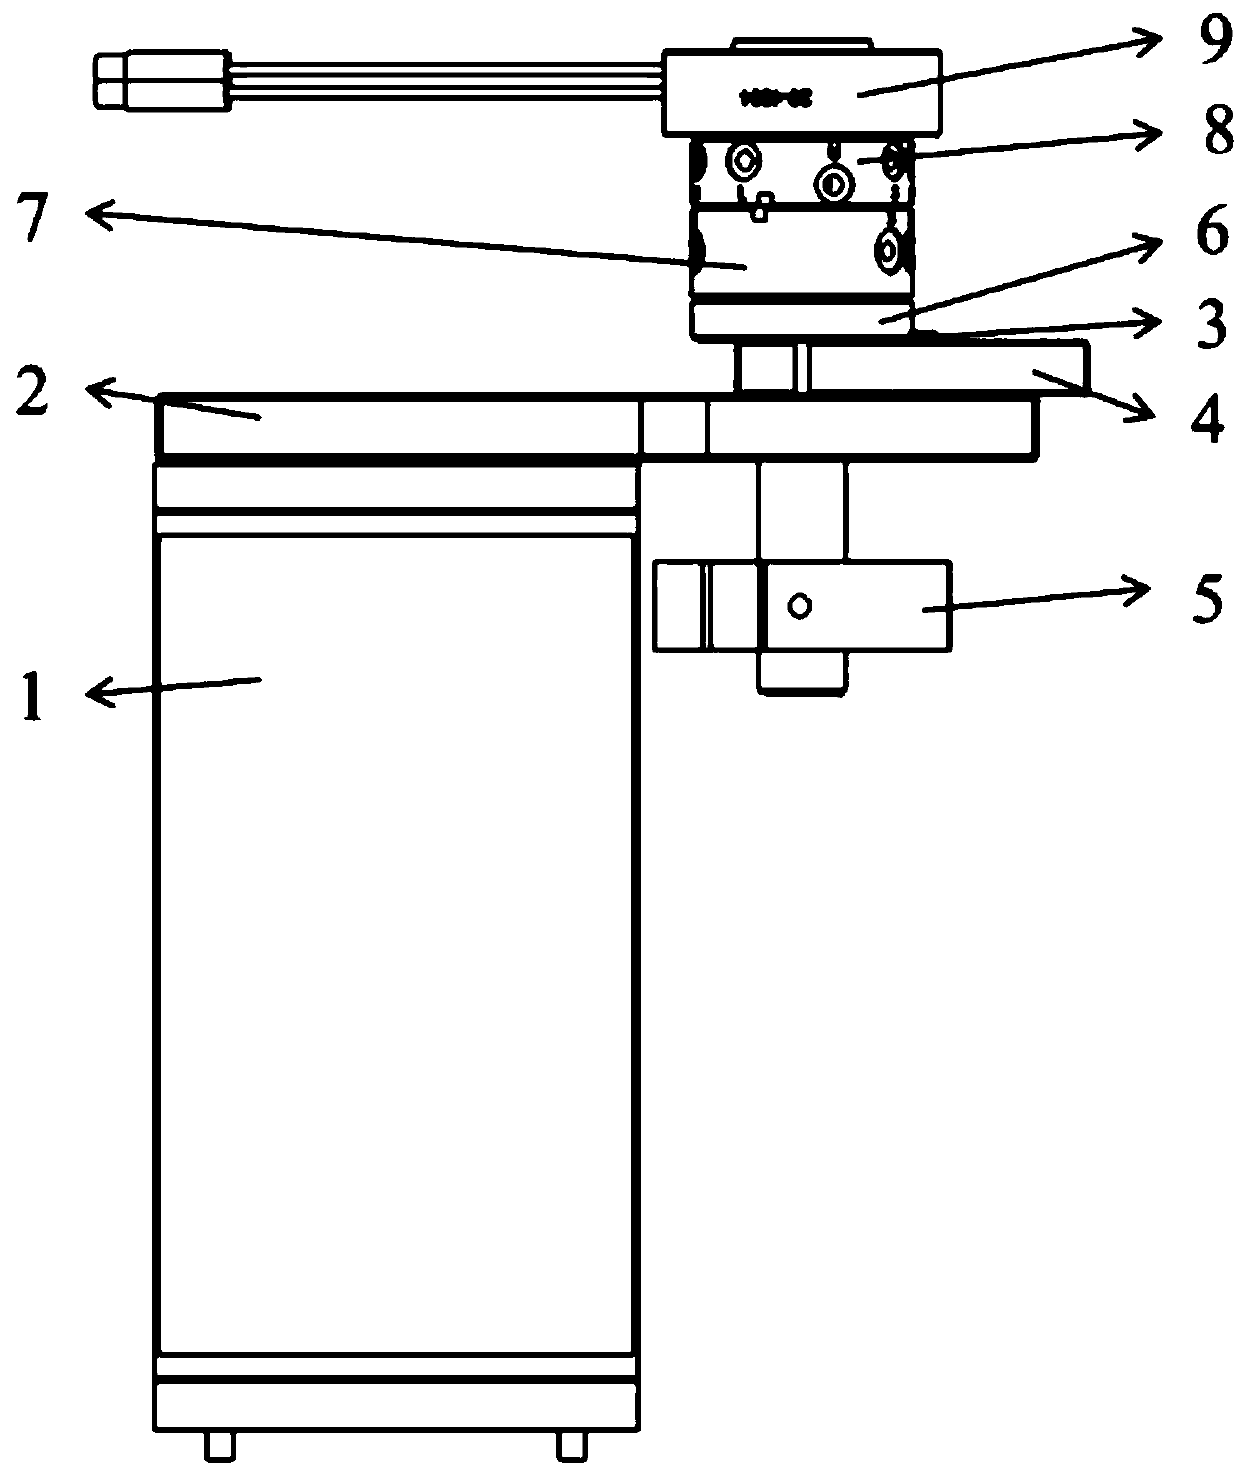 Welding head assembling and disassembling device